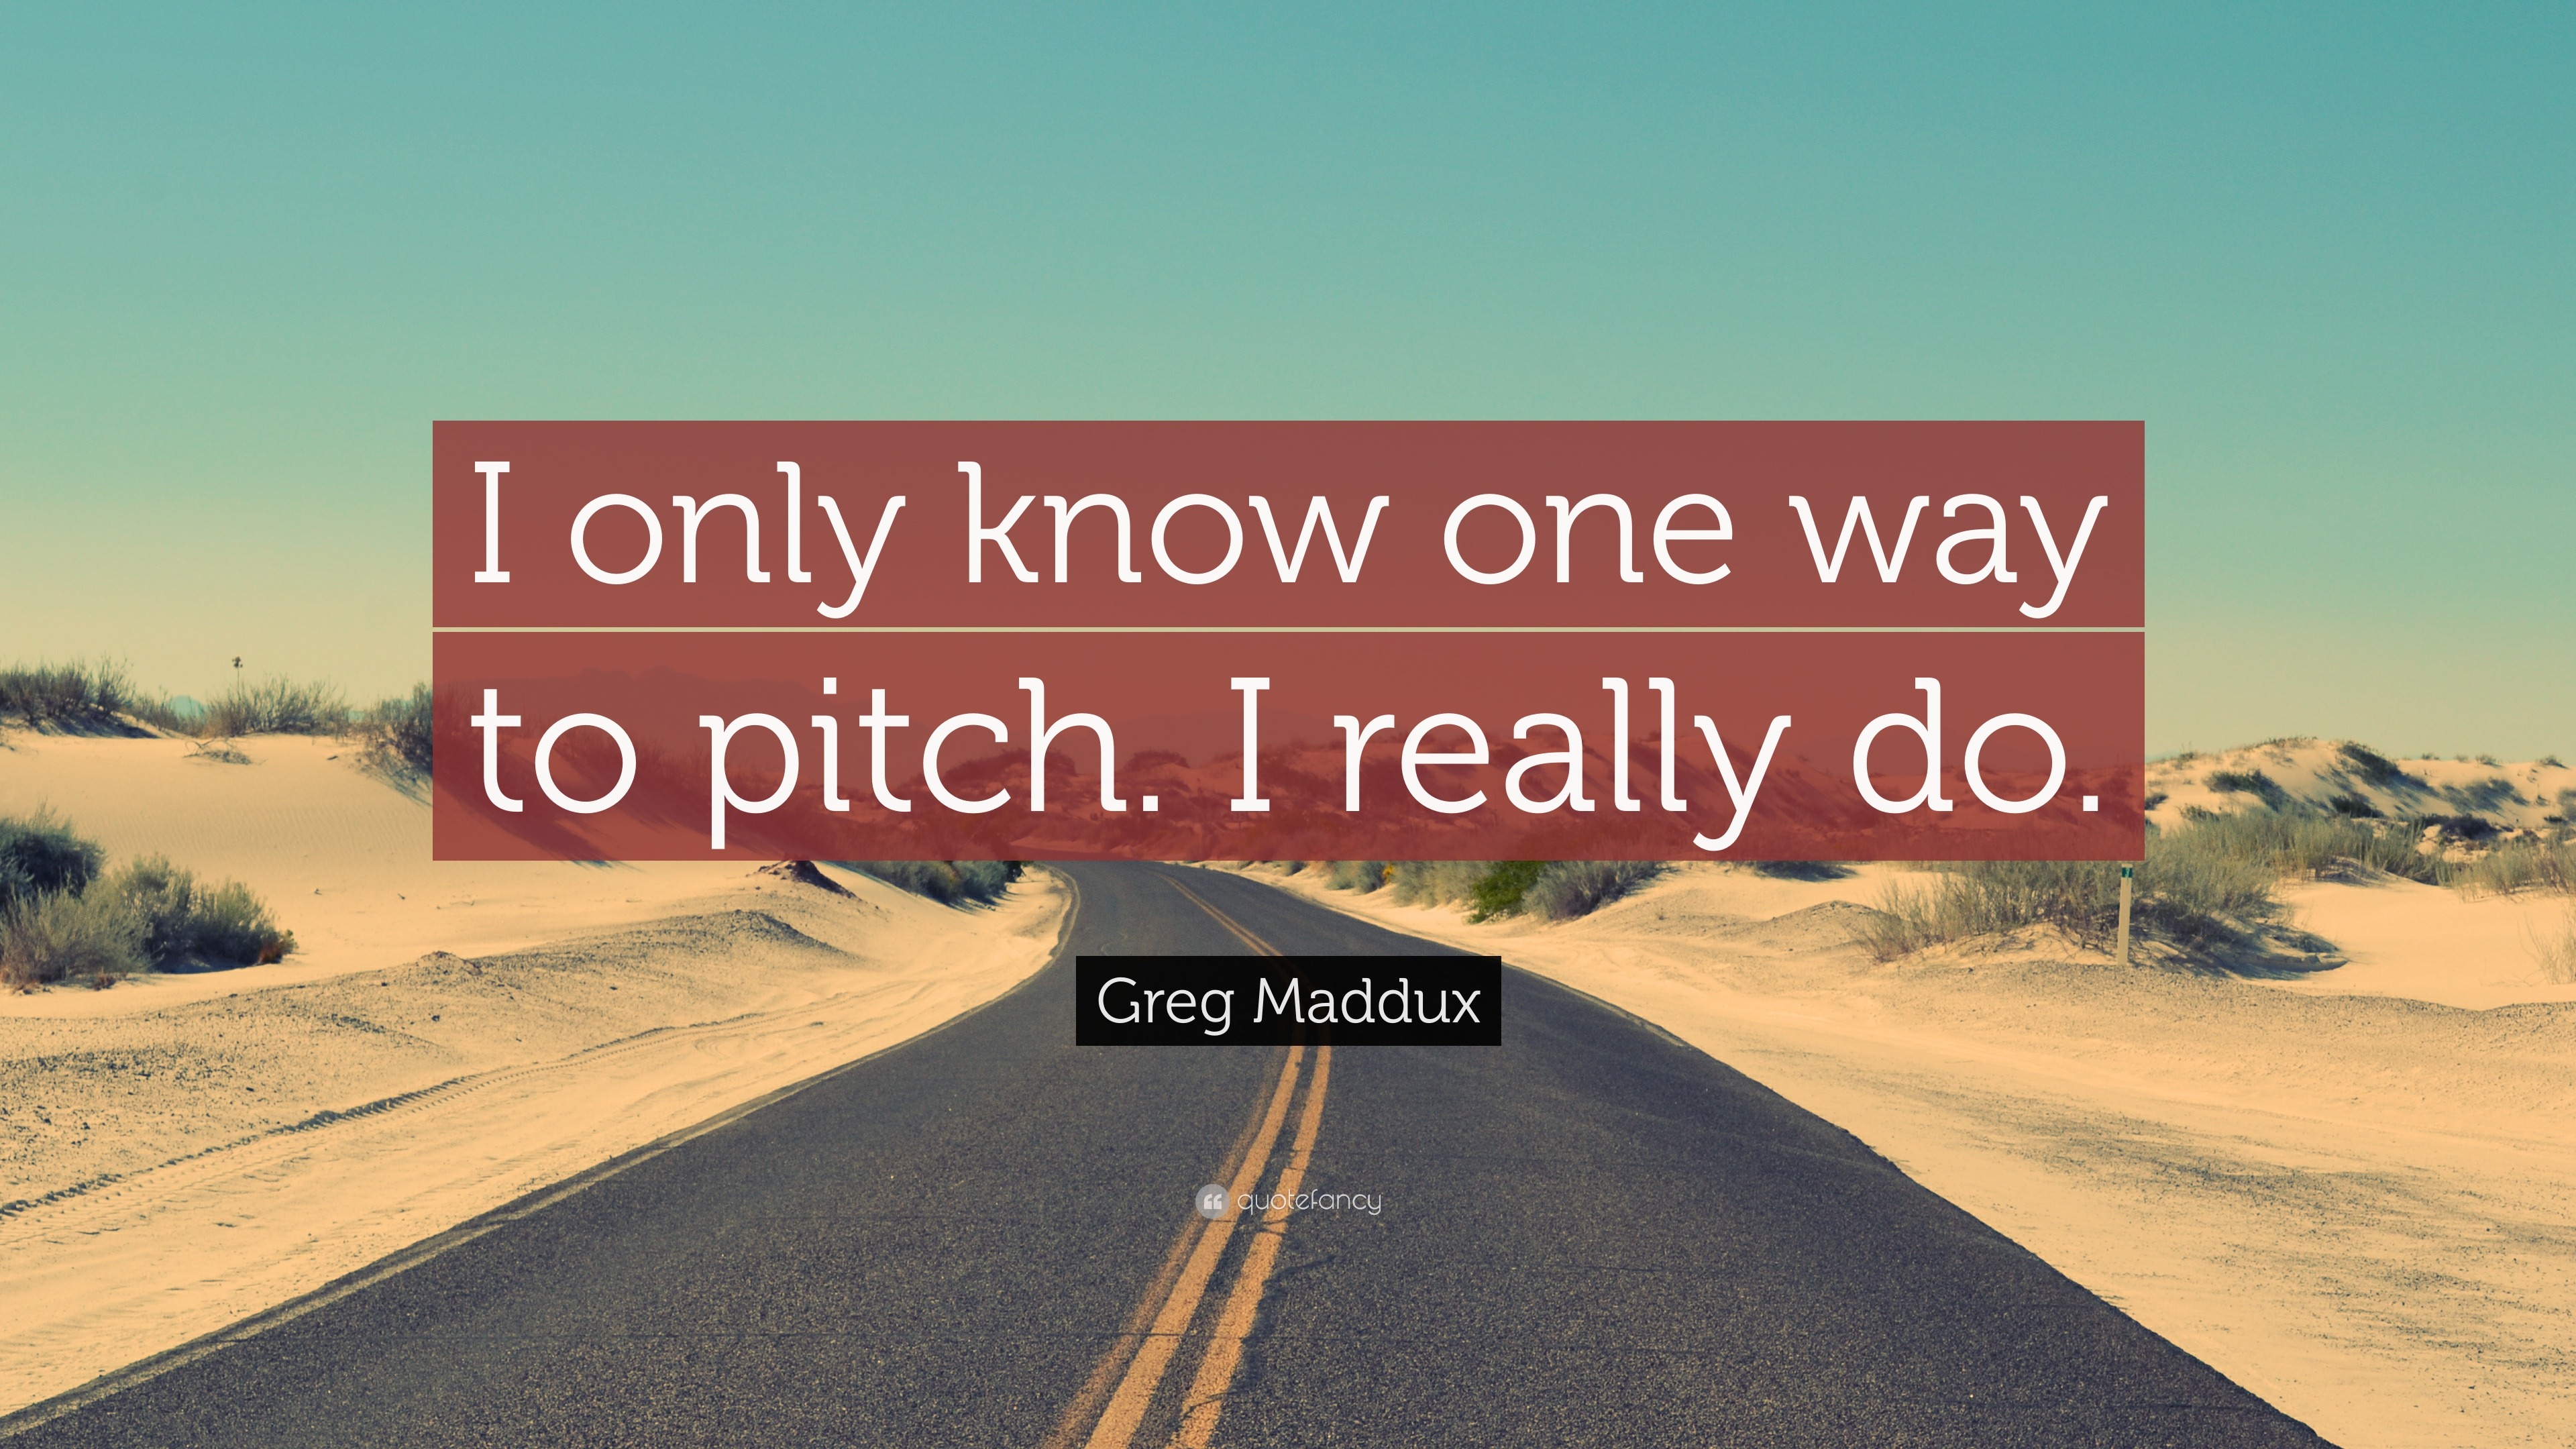 Greg Maddux 'try less' quotes